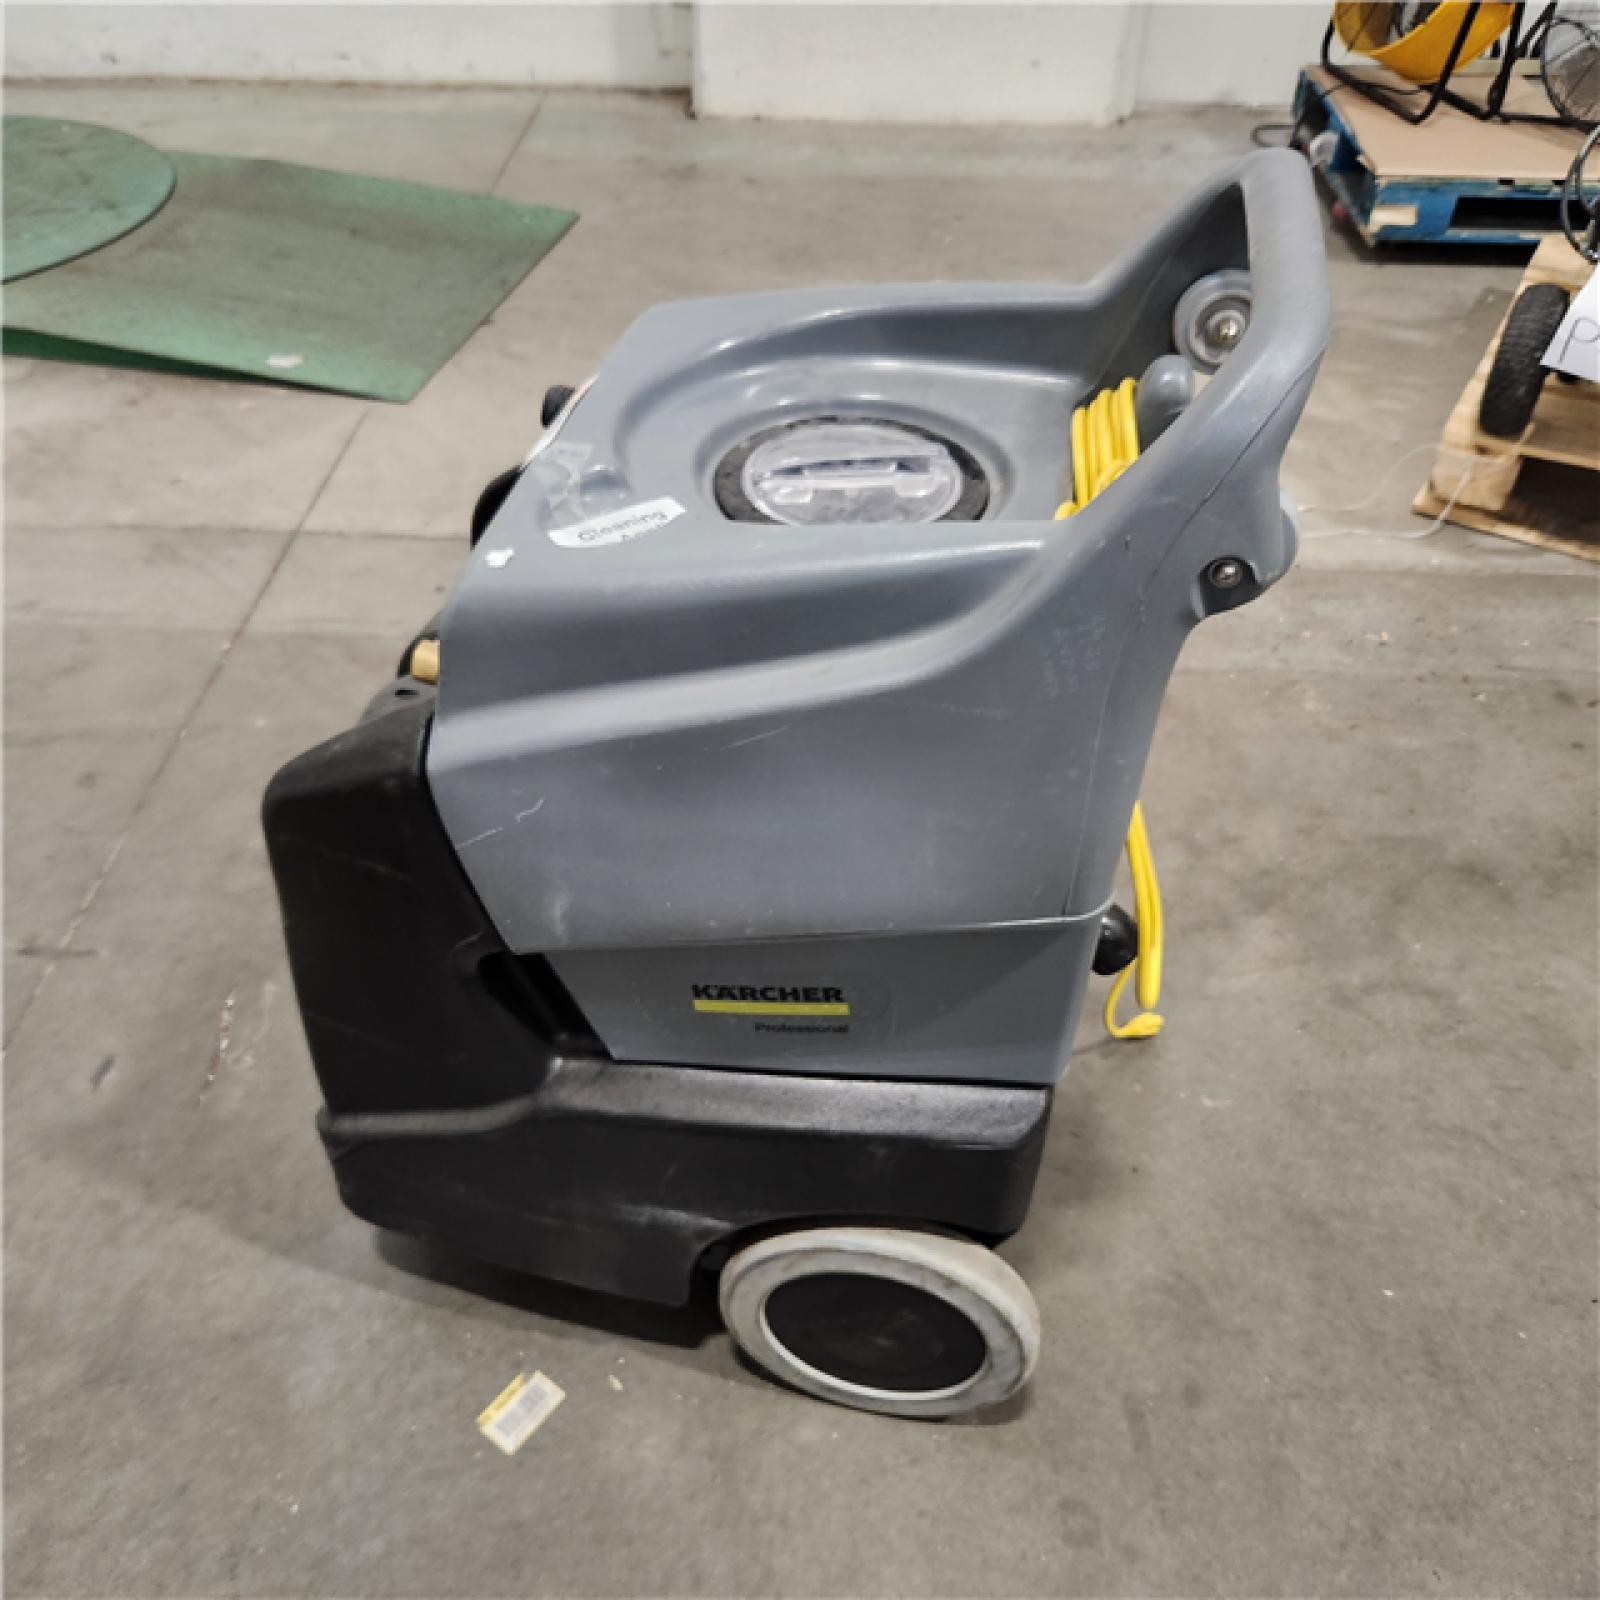 Dallas Location - As-Is KARCHER SPRAY CLEANER Puzzi 50/14 E